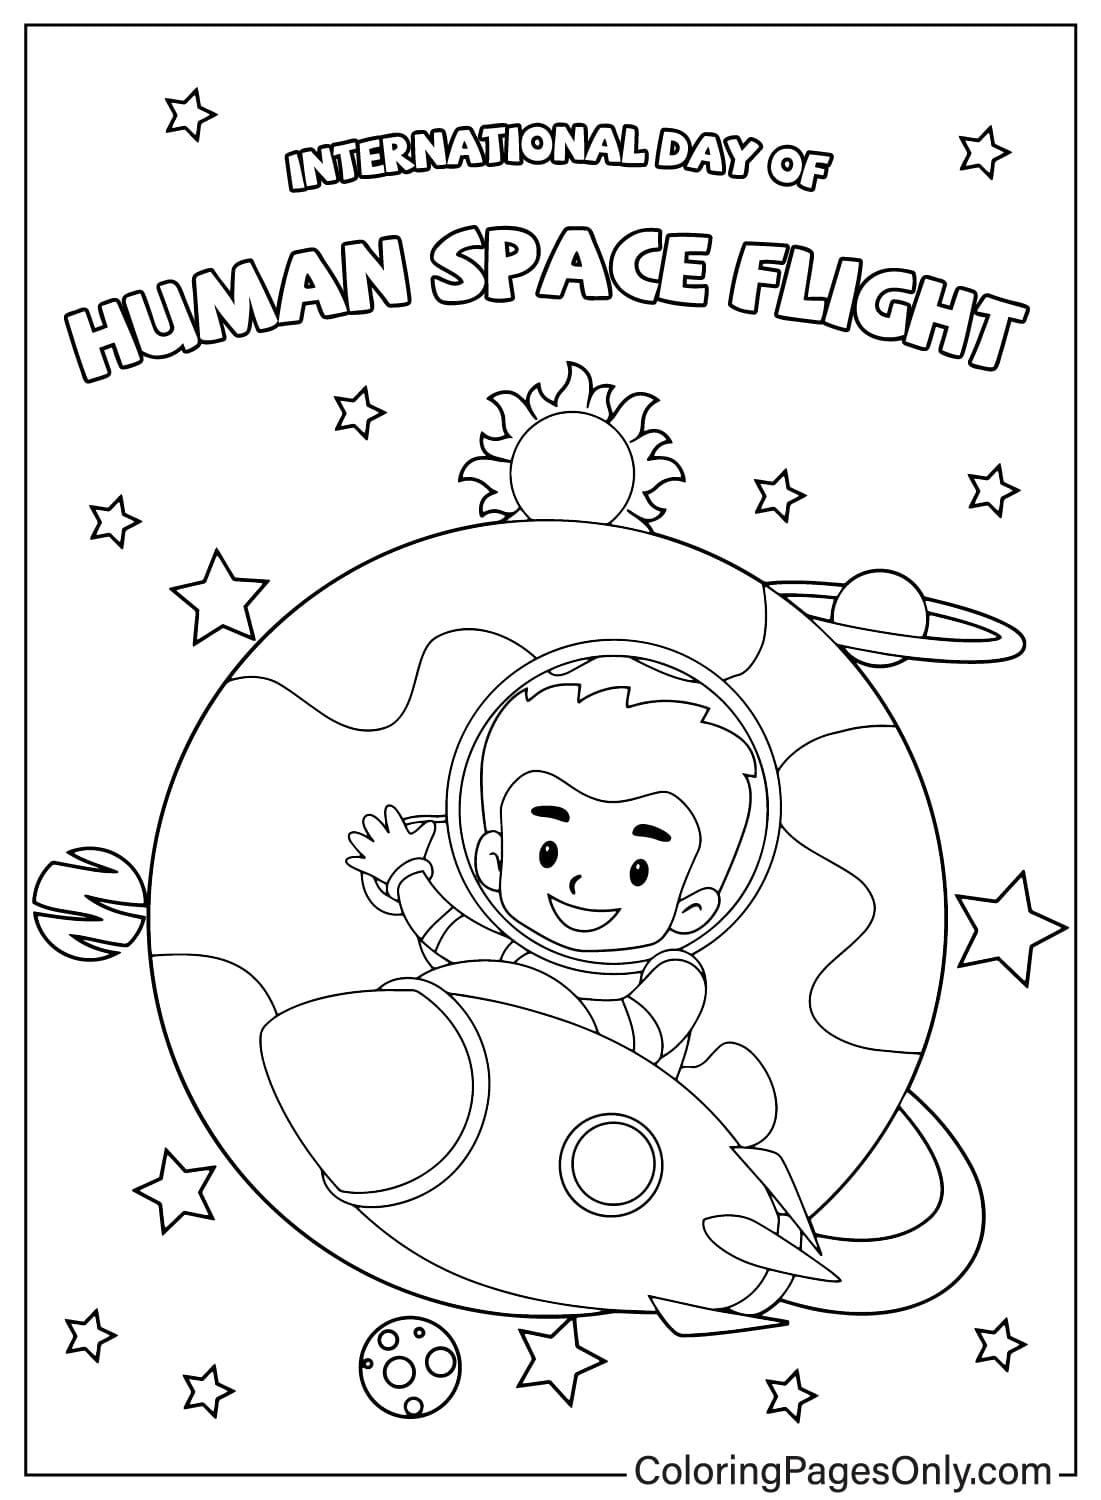 Pictures International Day of Human Space Flight Coloring Page from International Day of Human Space Flight